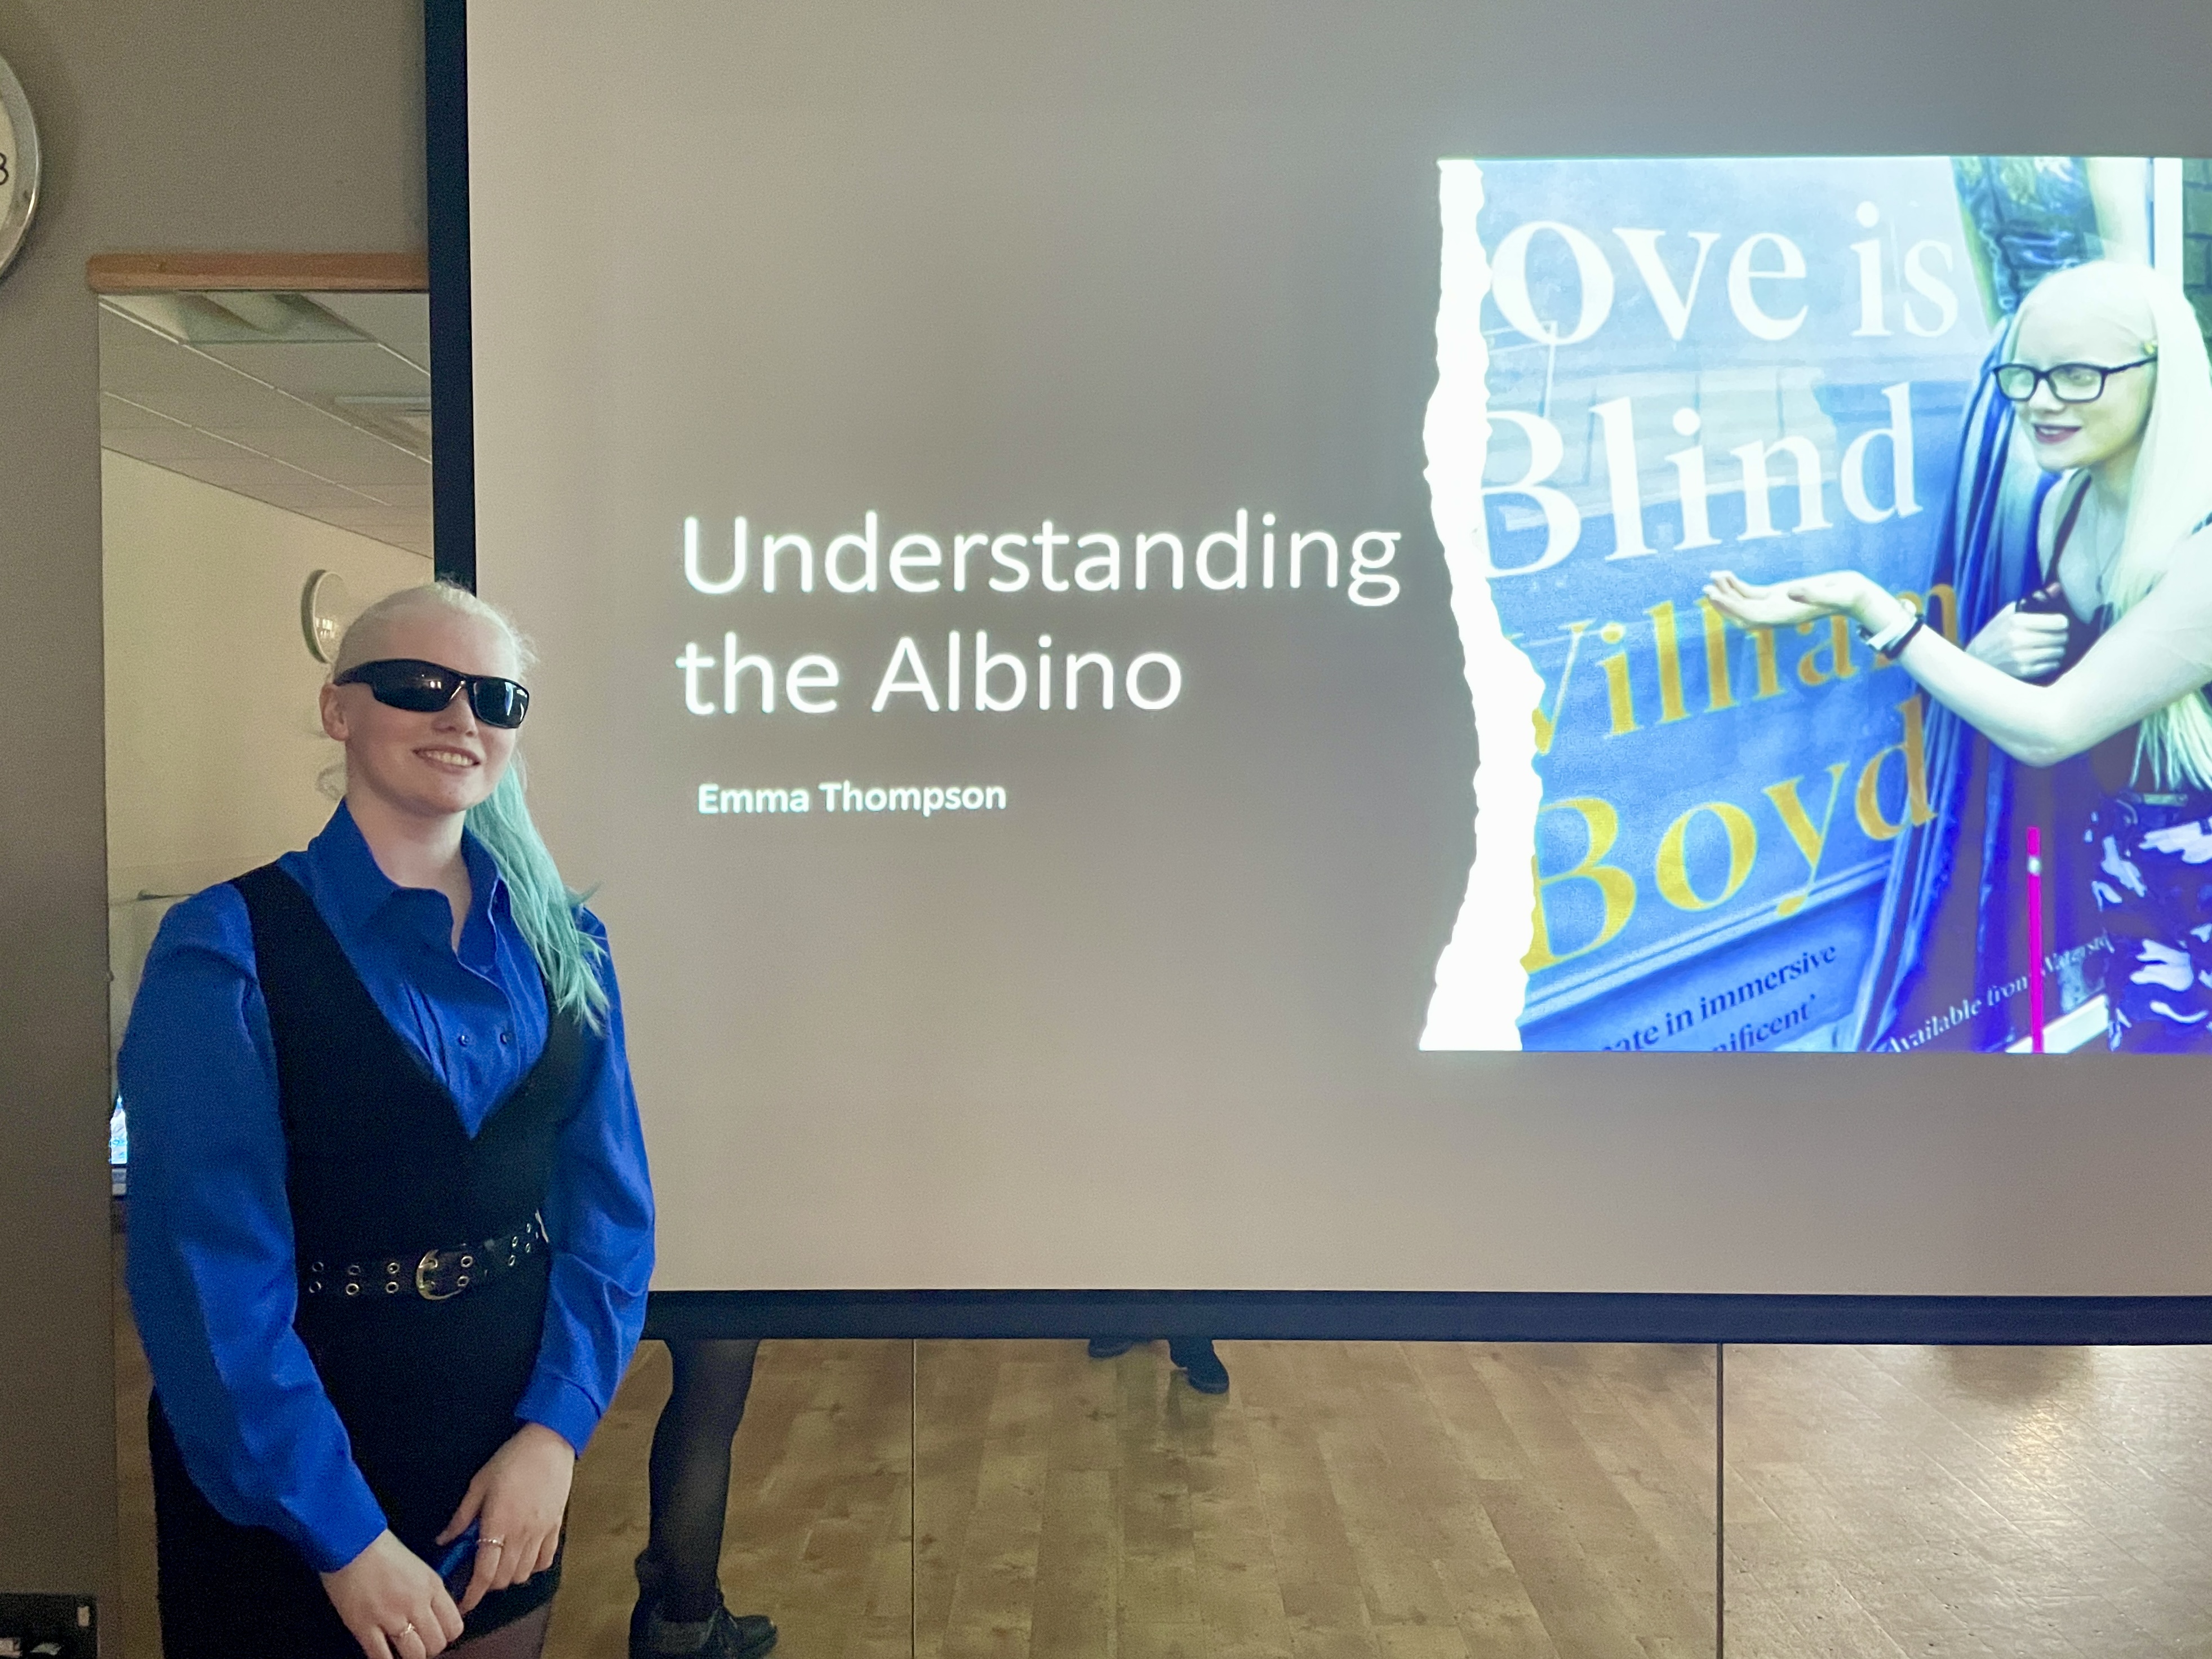 Student shines light on Albinism in powerful presentation